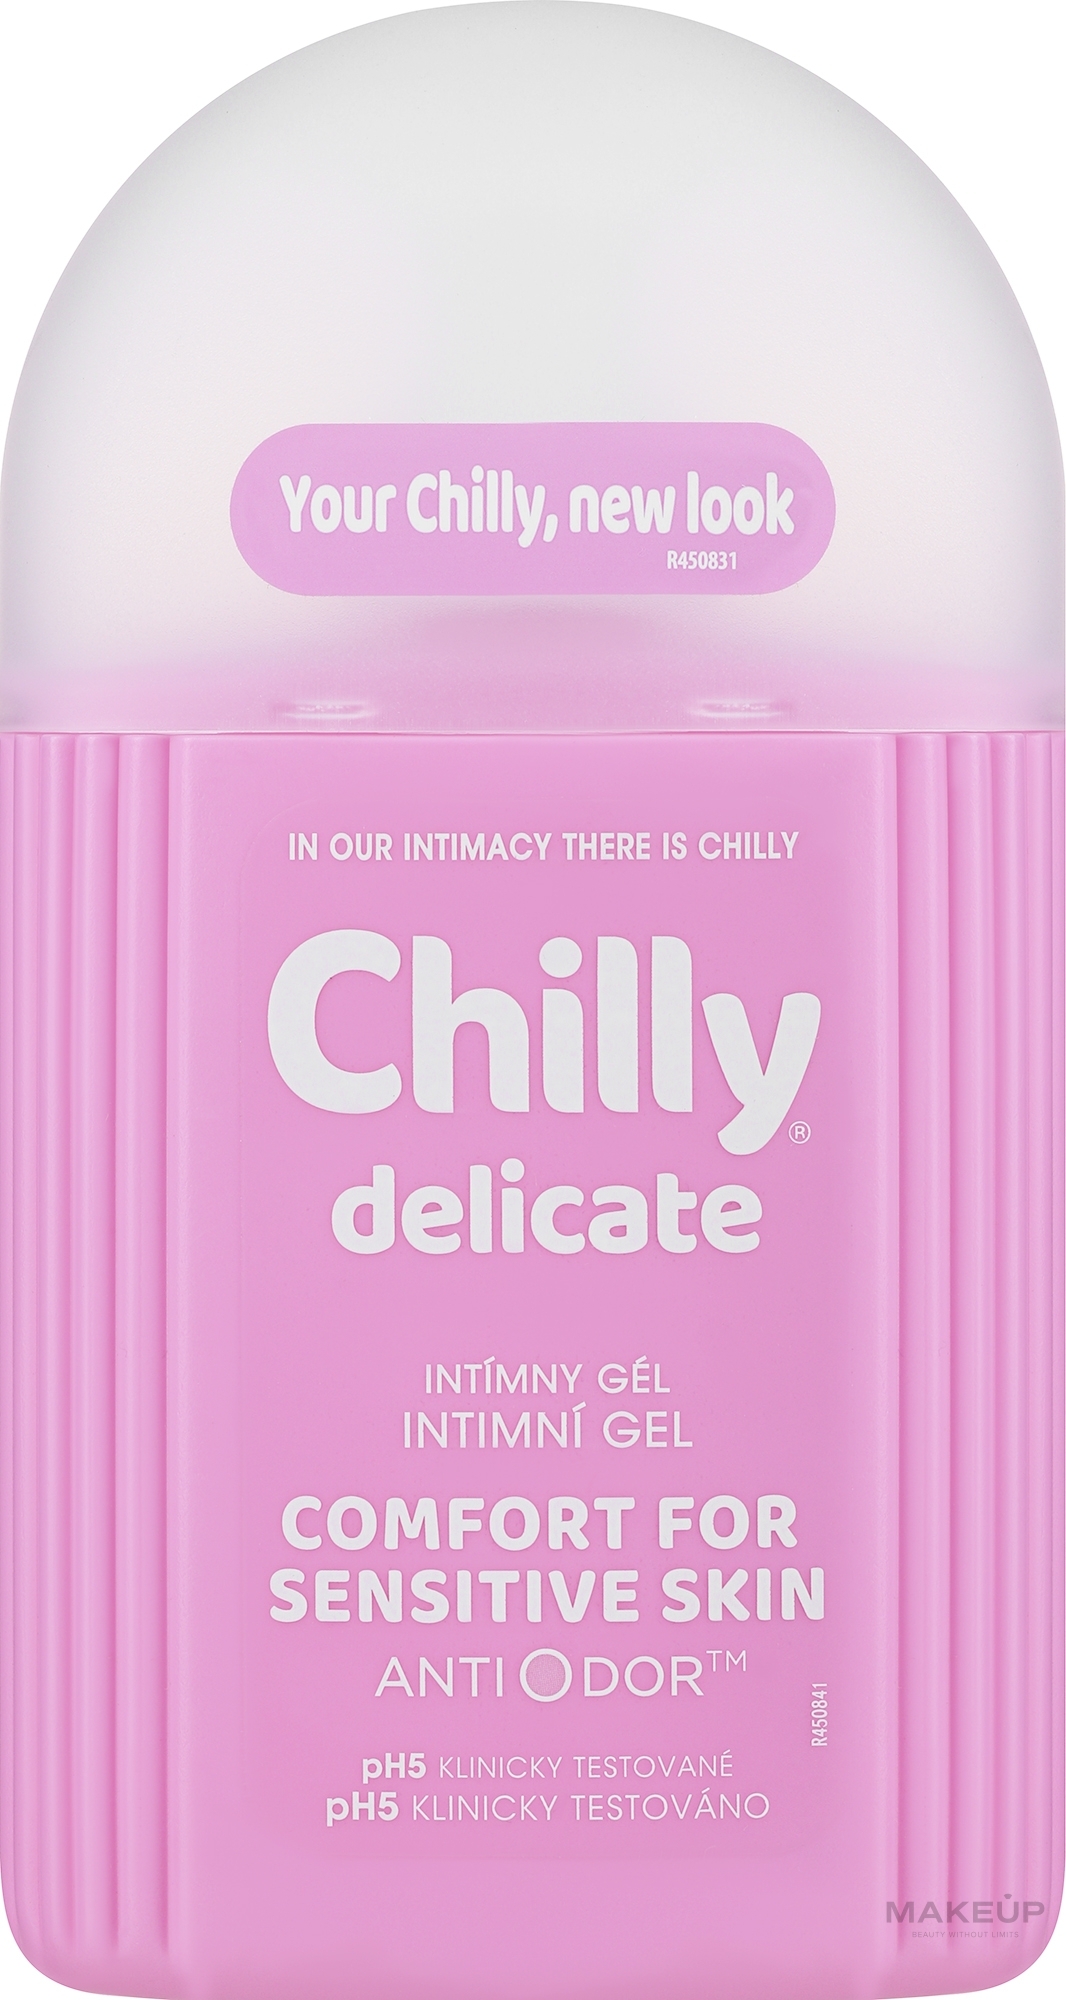 Intimate Wash Gel "Delicate" - Chilly Intima Delicate Intimate Gel — photo 200 ml